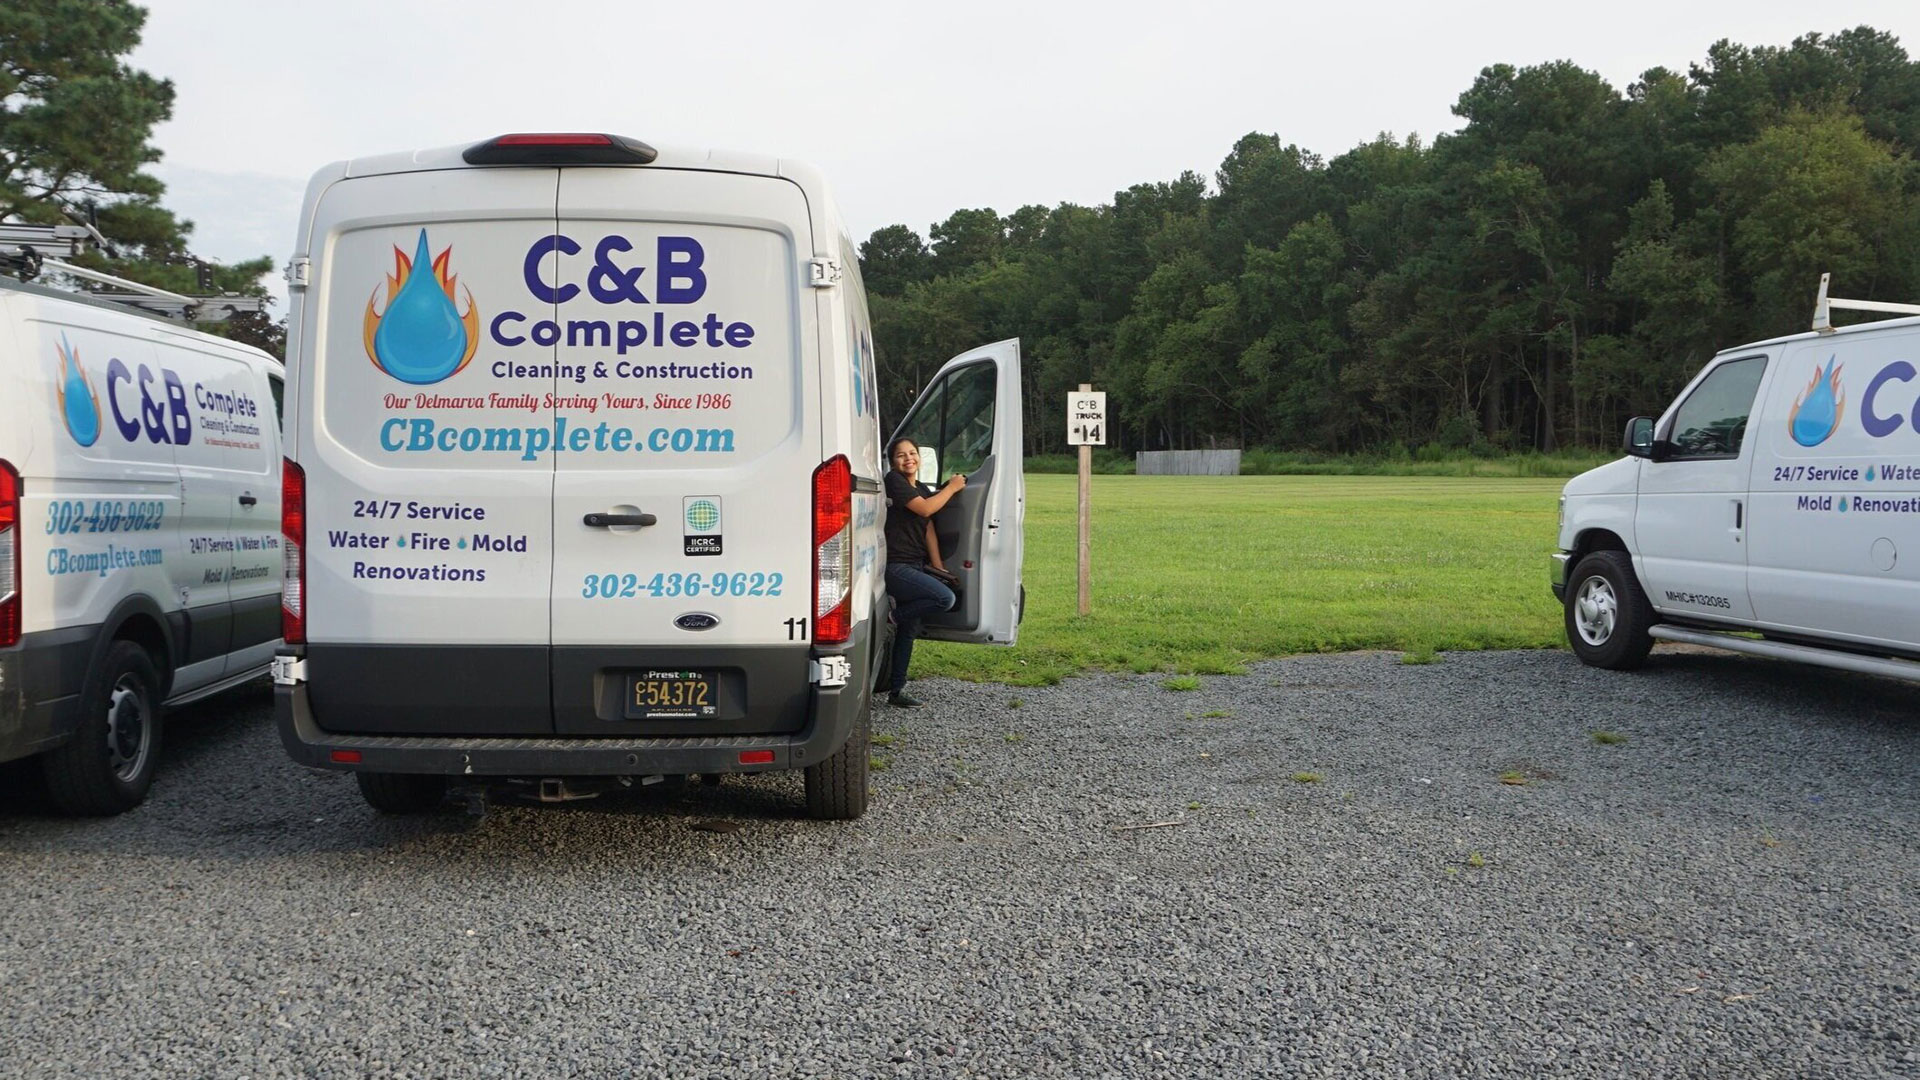 C&B COMPLETE CLEANING & CONSTRUCTION.